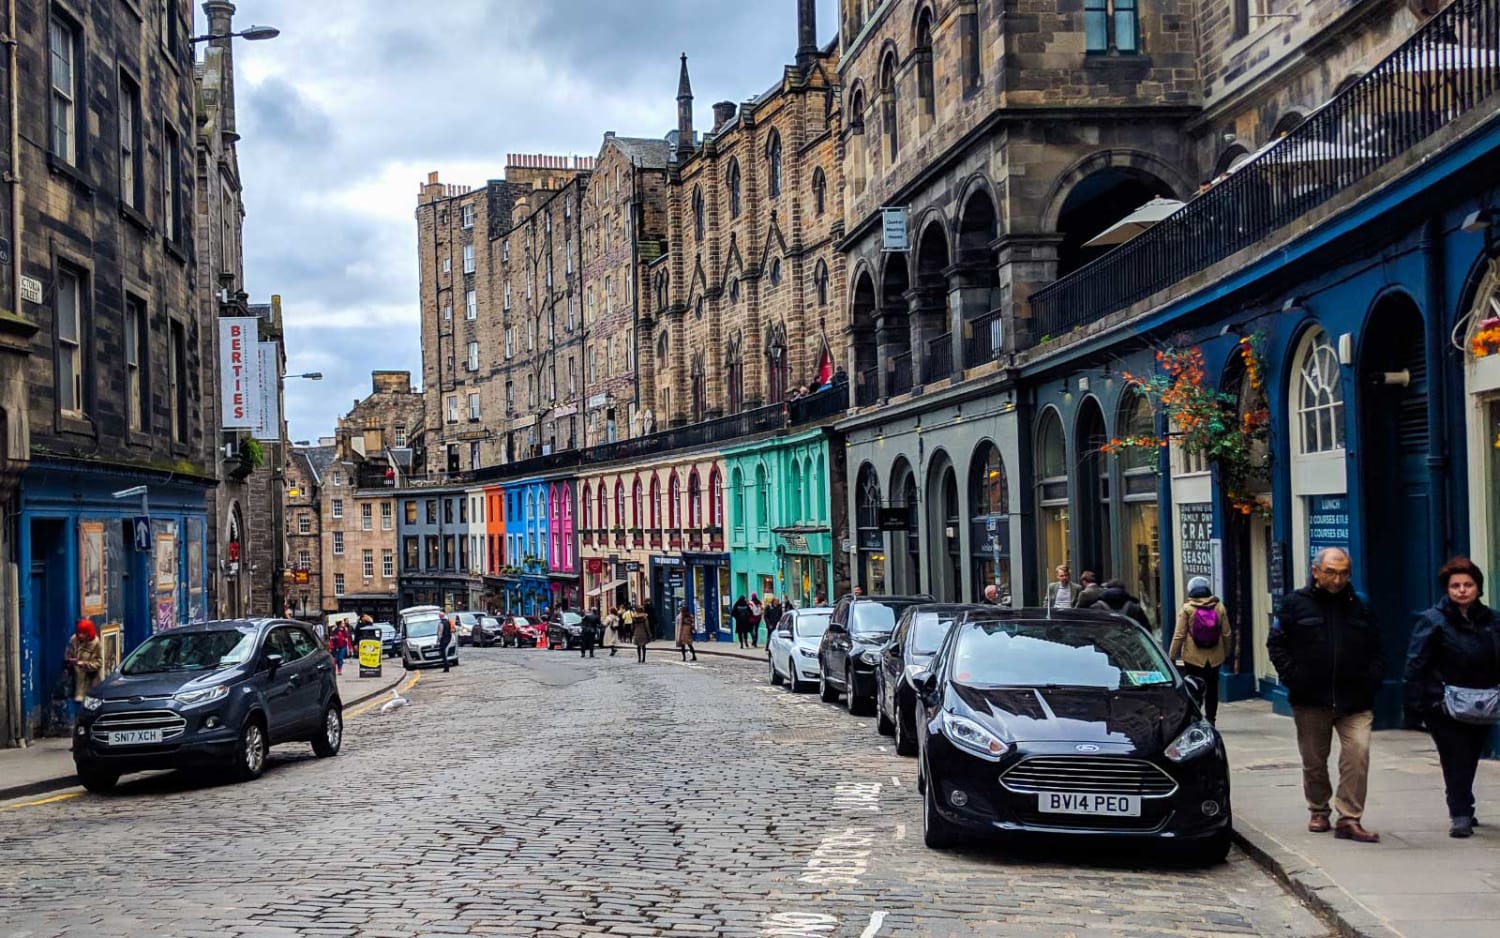 Harry Potter in Edinburgh: A City of Magical Inspiration